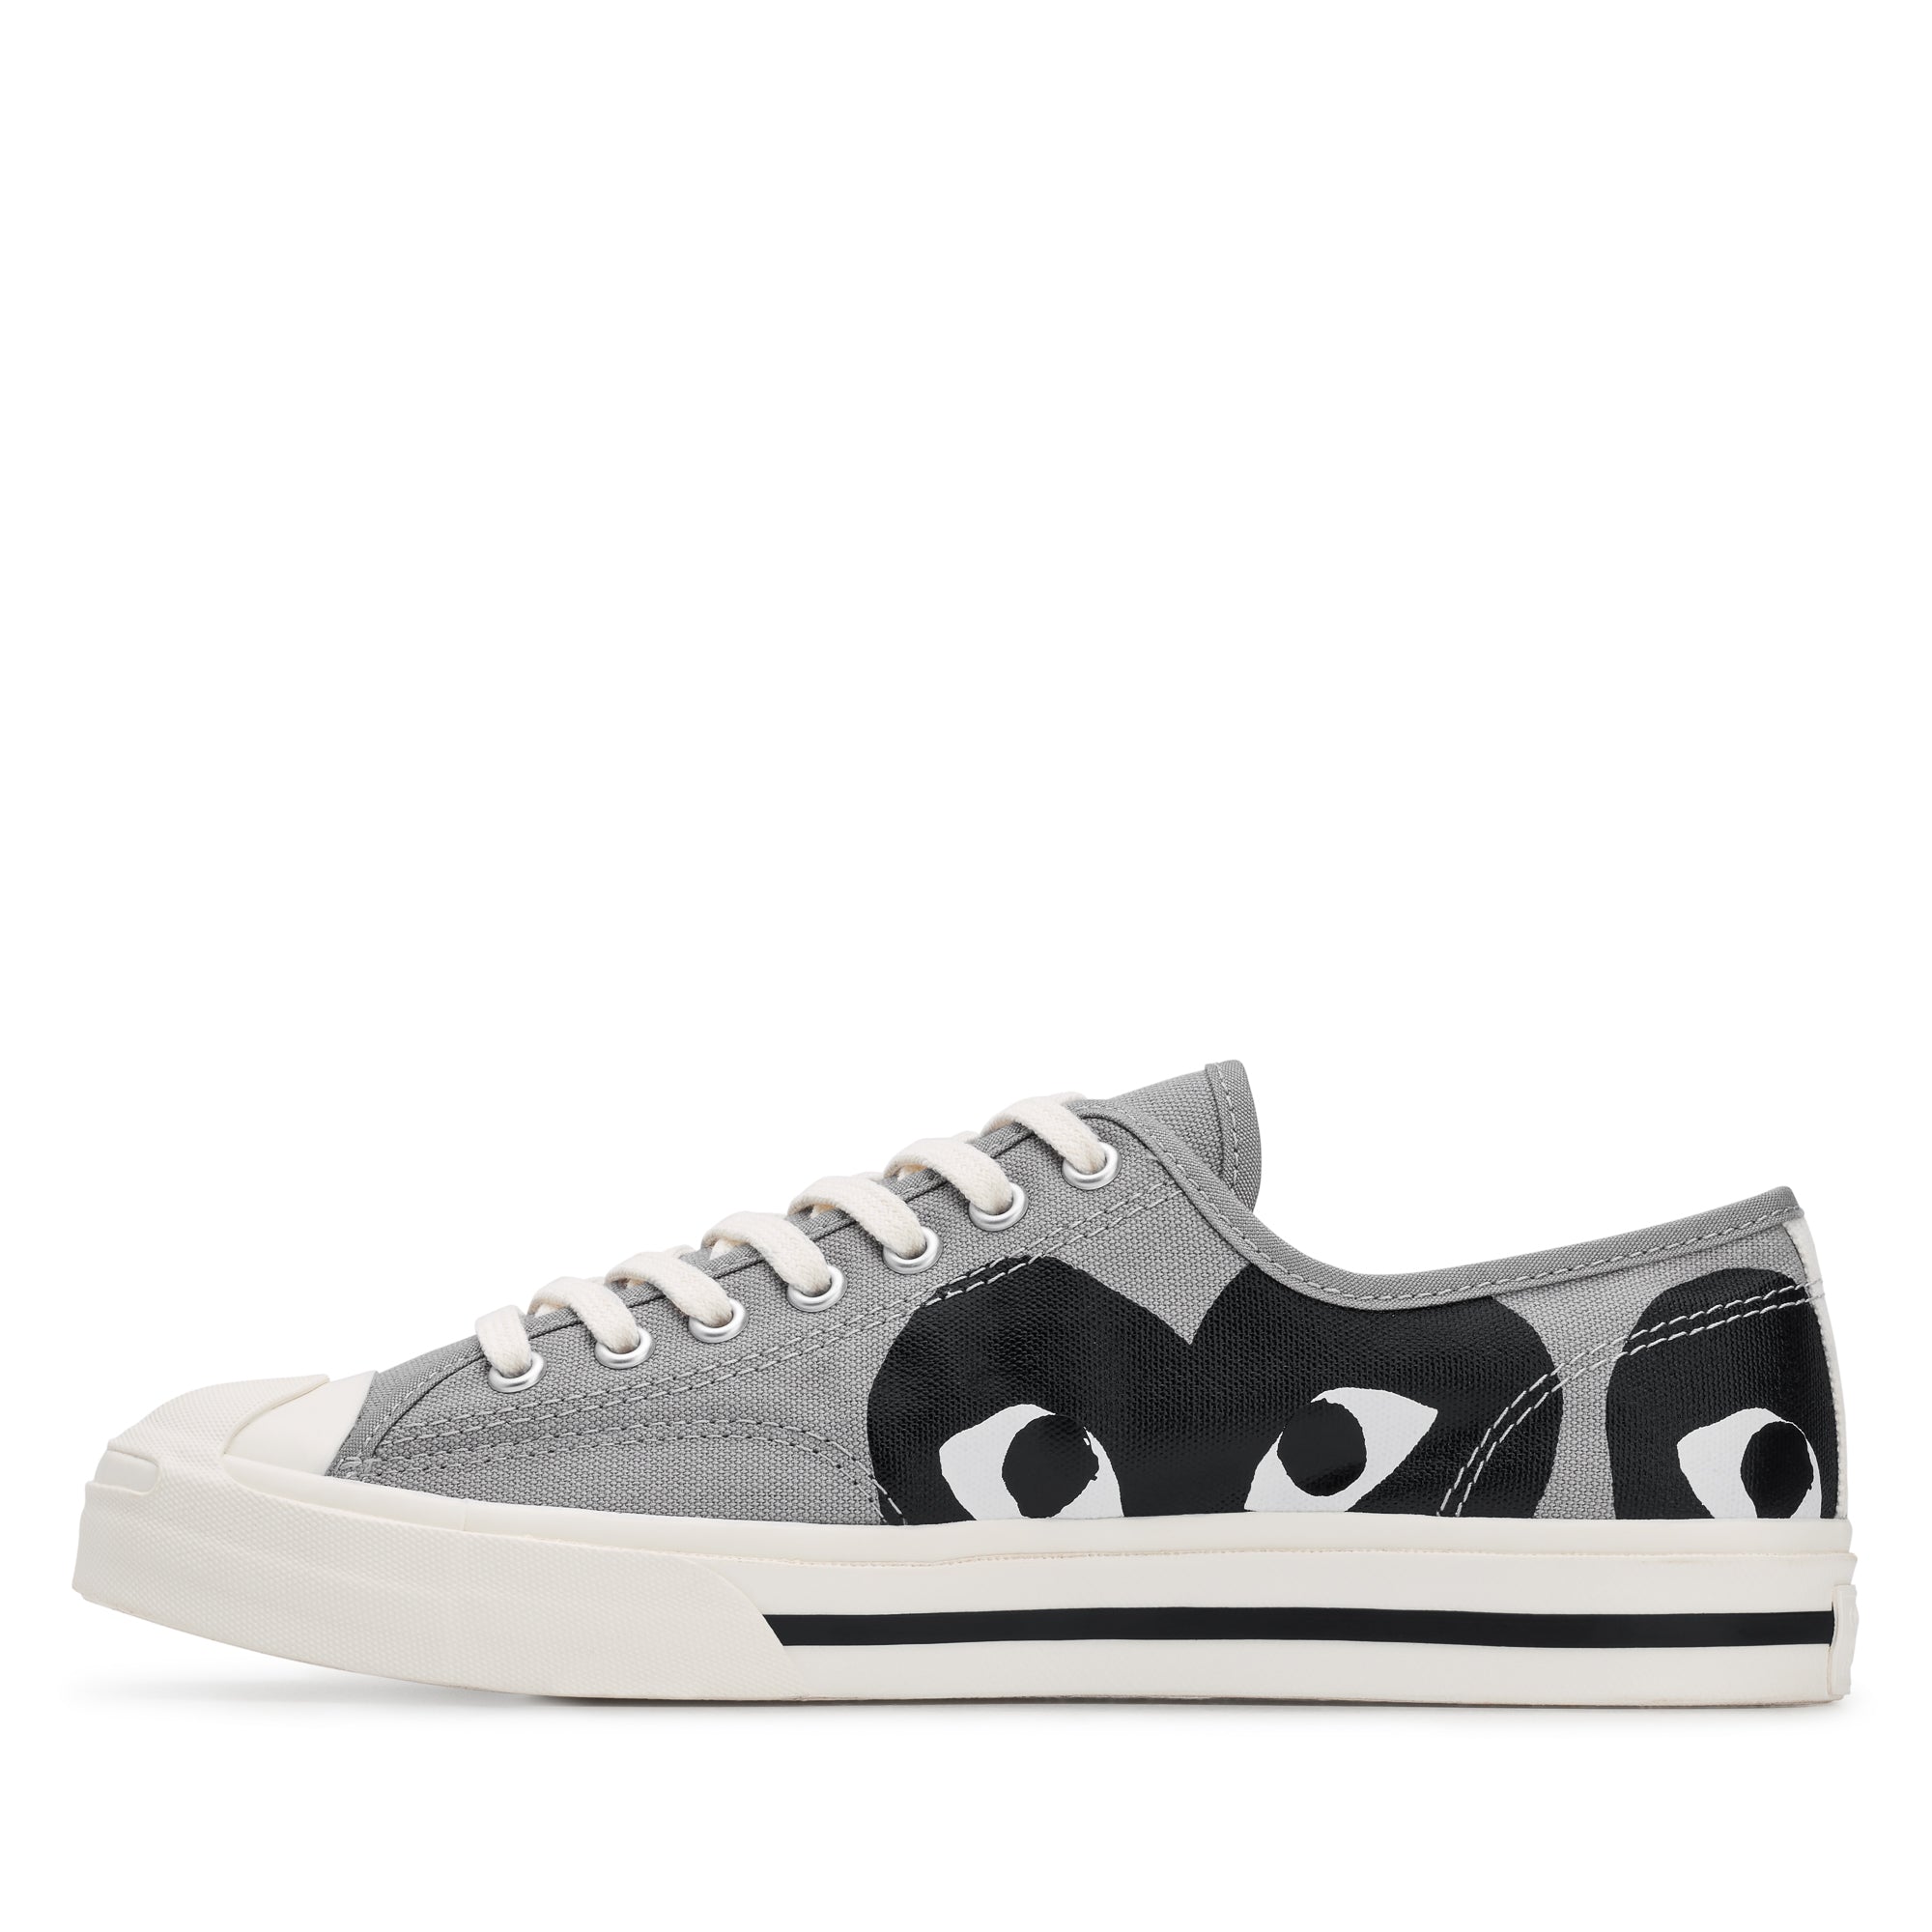 Play Converse - Low Top Black Heart Jack Purcell Sneakers - (Black) view 2